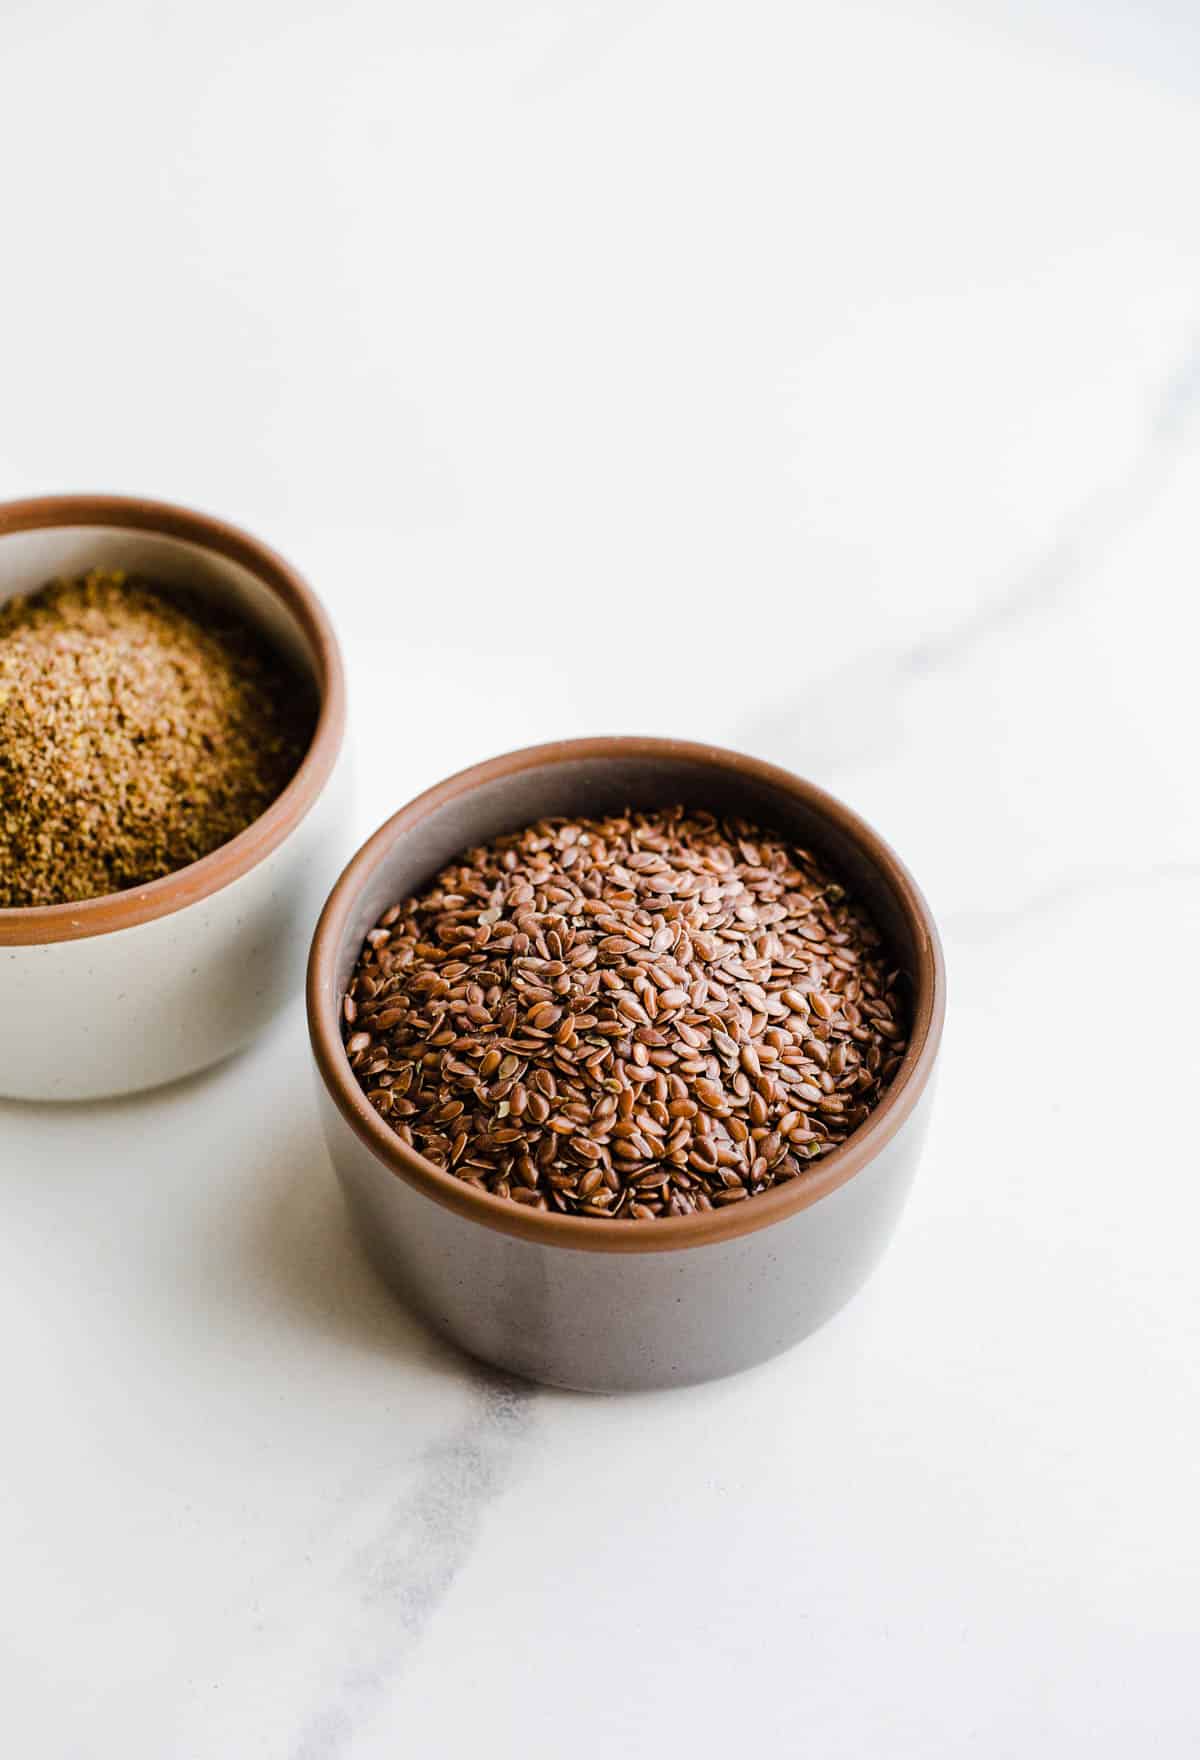 Whole and ground gluten-free seeds in two small bowls.